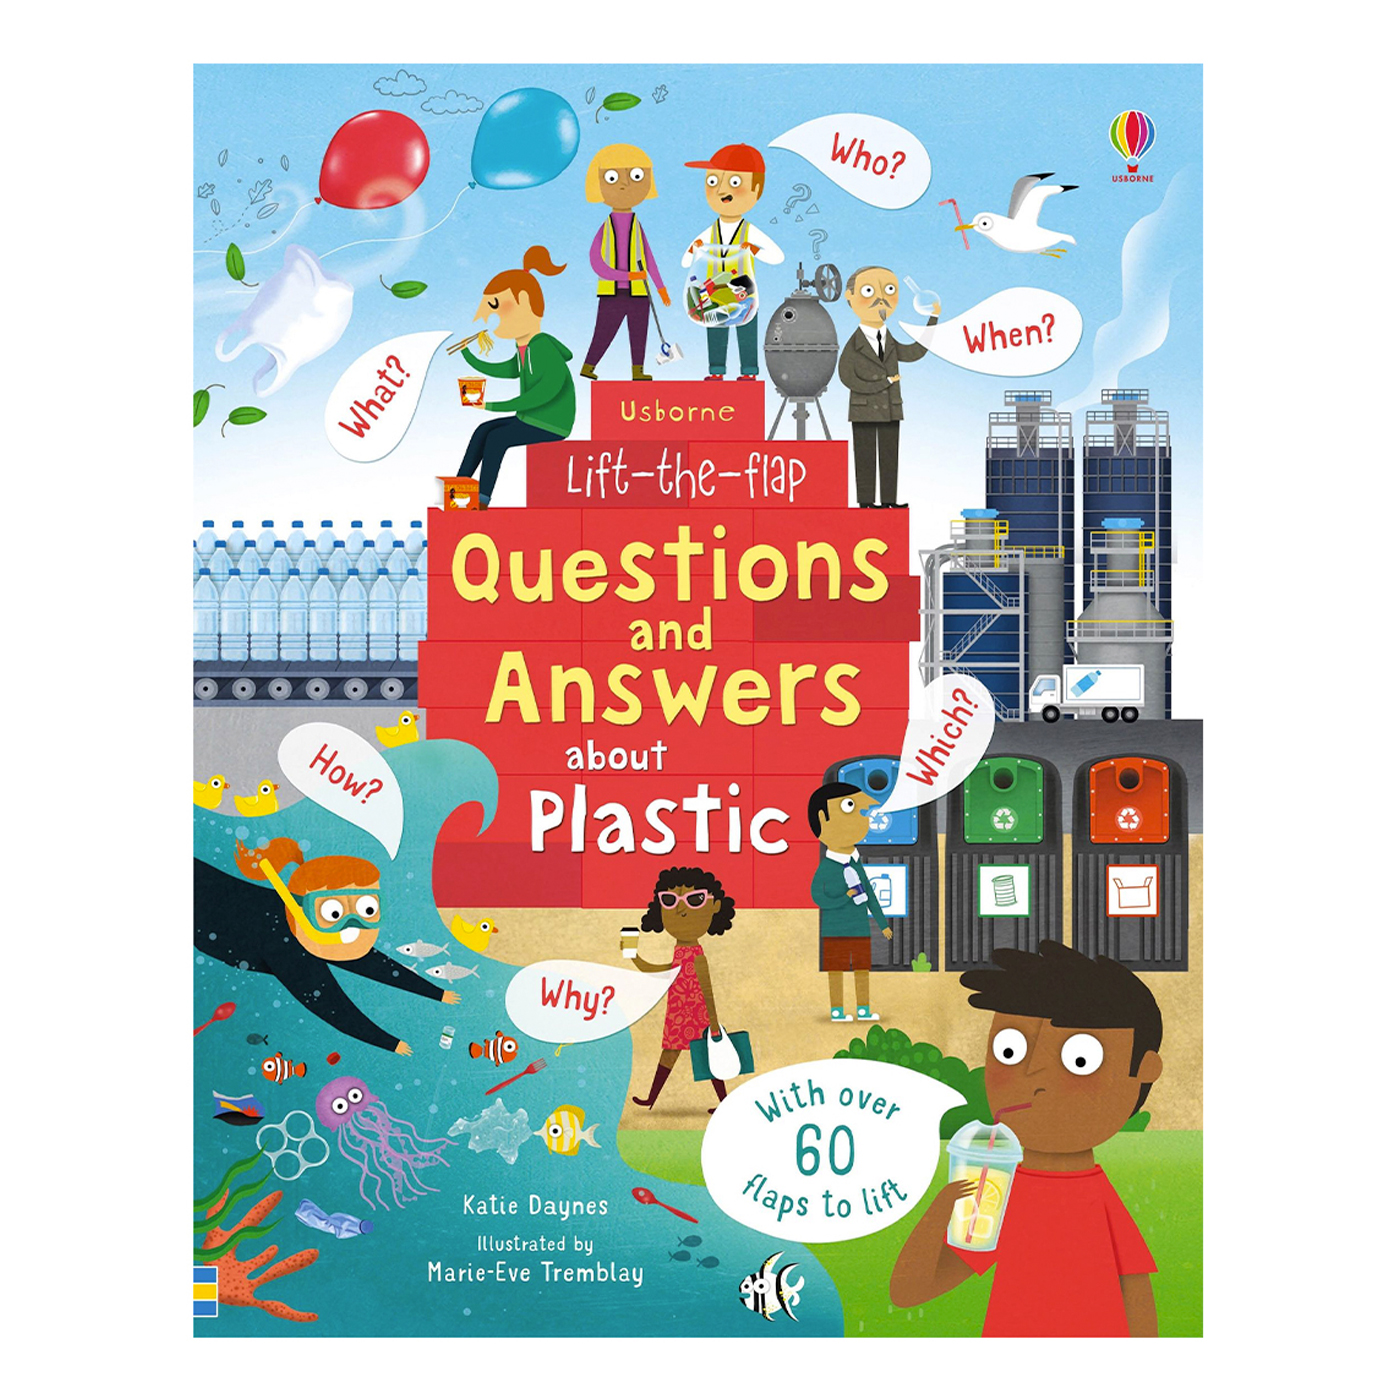 USBORNE Lift-the-flap Questions And Answers About Plastic